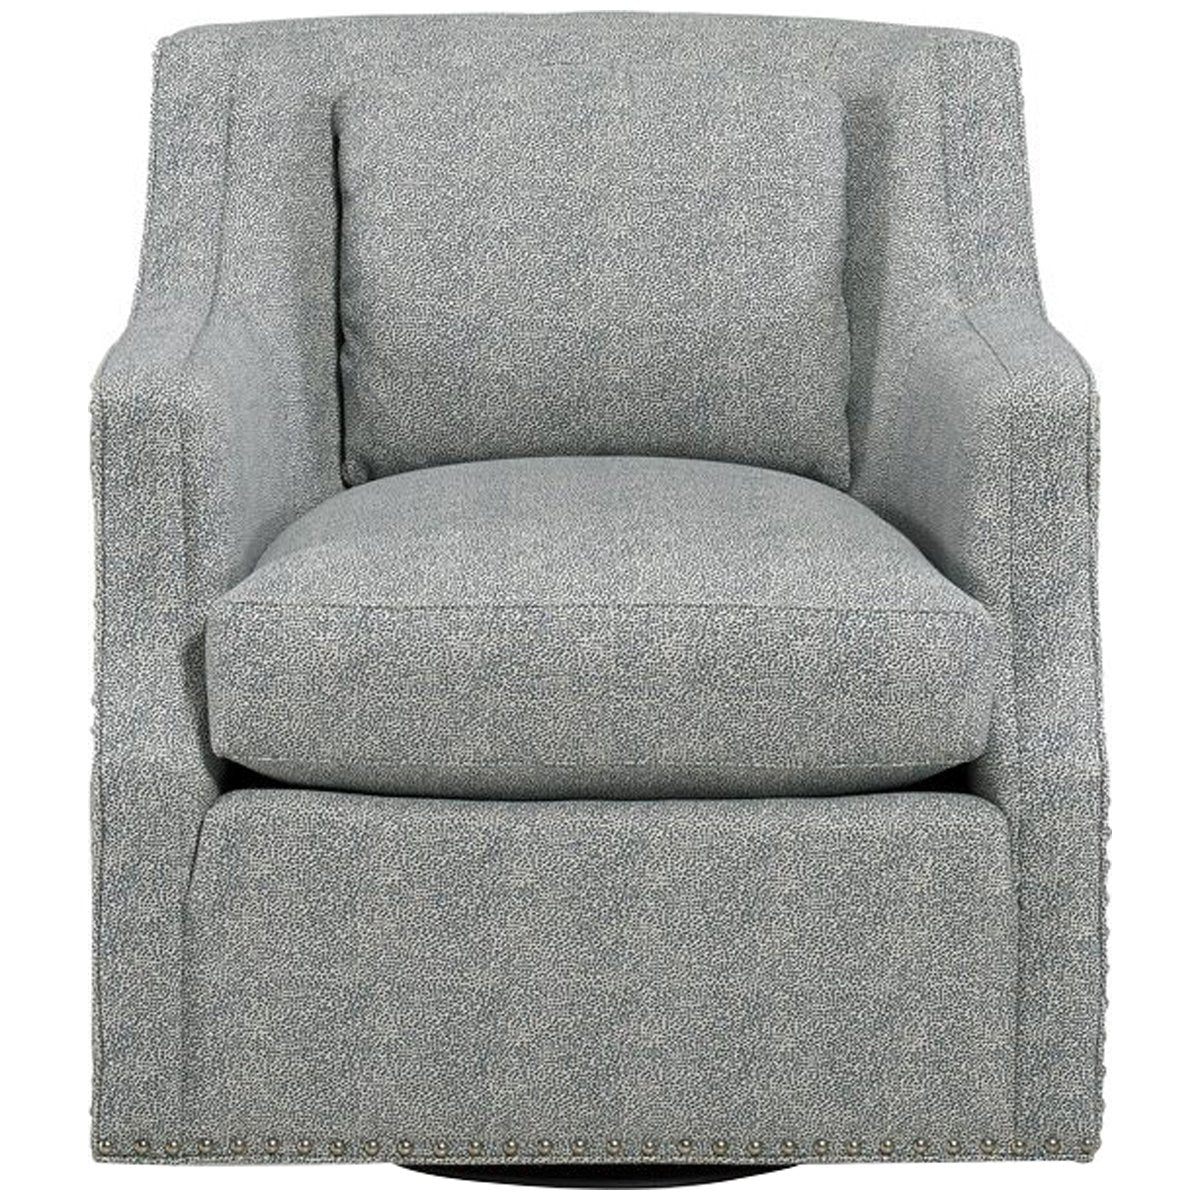 Hickory White Knee Swivel Arm Chair